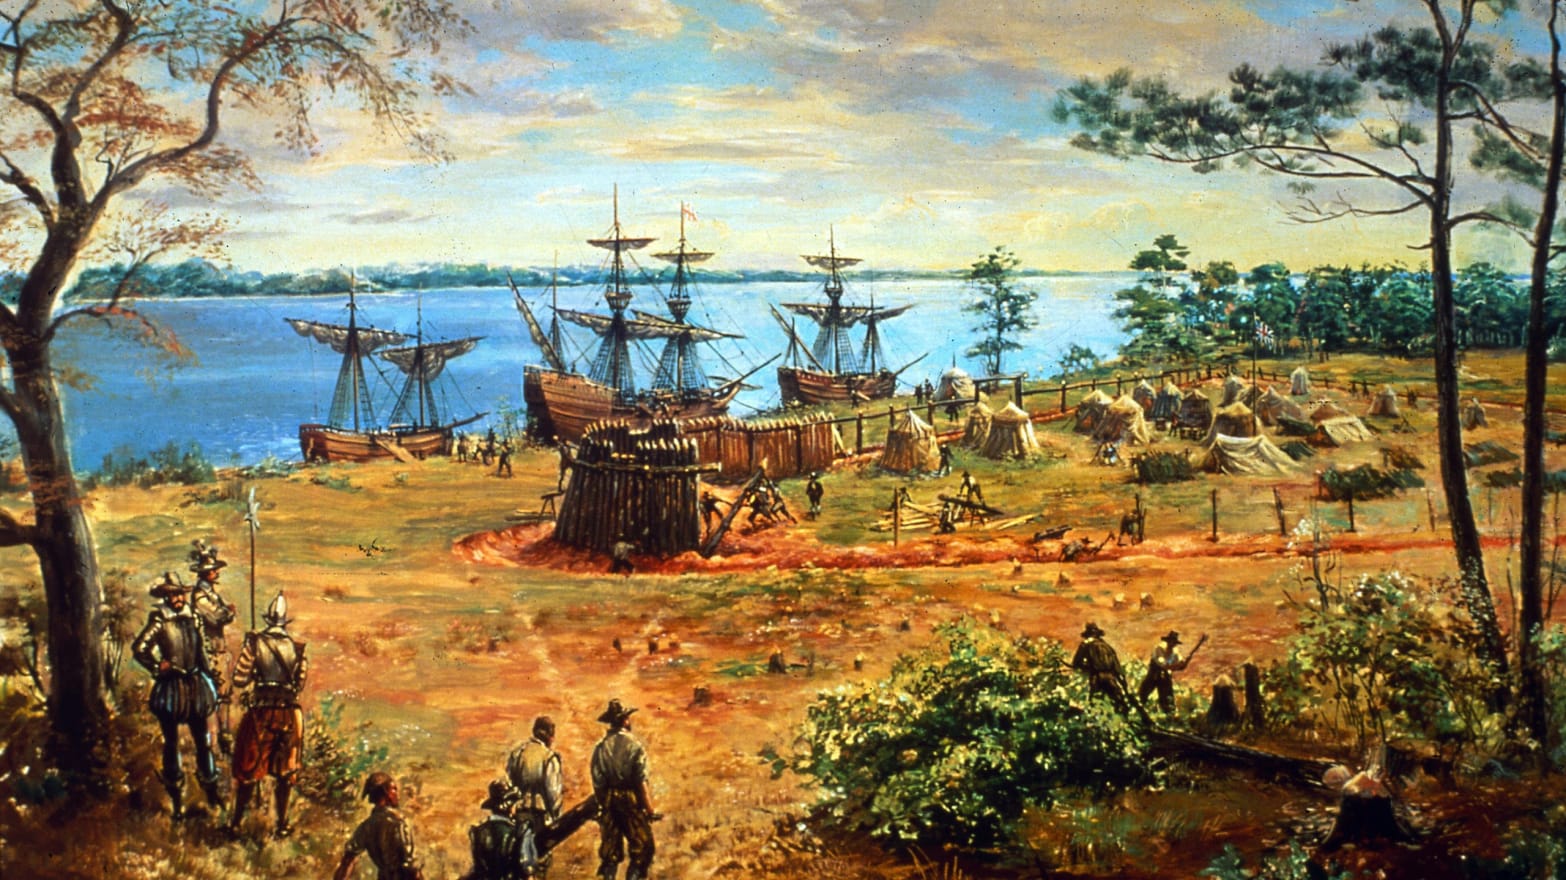 jamestown-settlers-were-cannibals-and-more-reasons-the-colony-was-hell